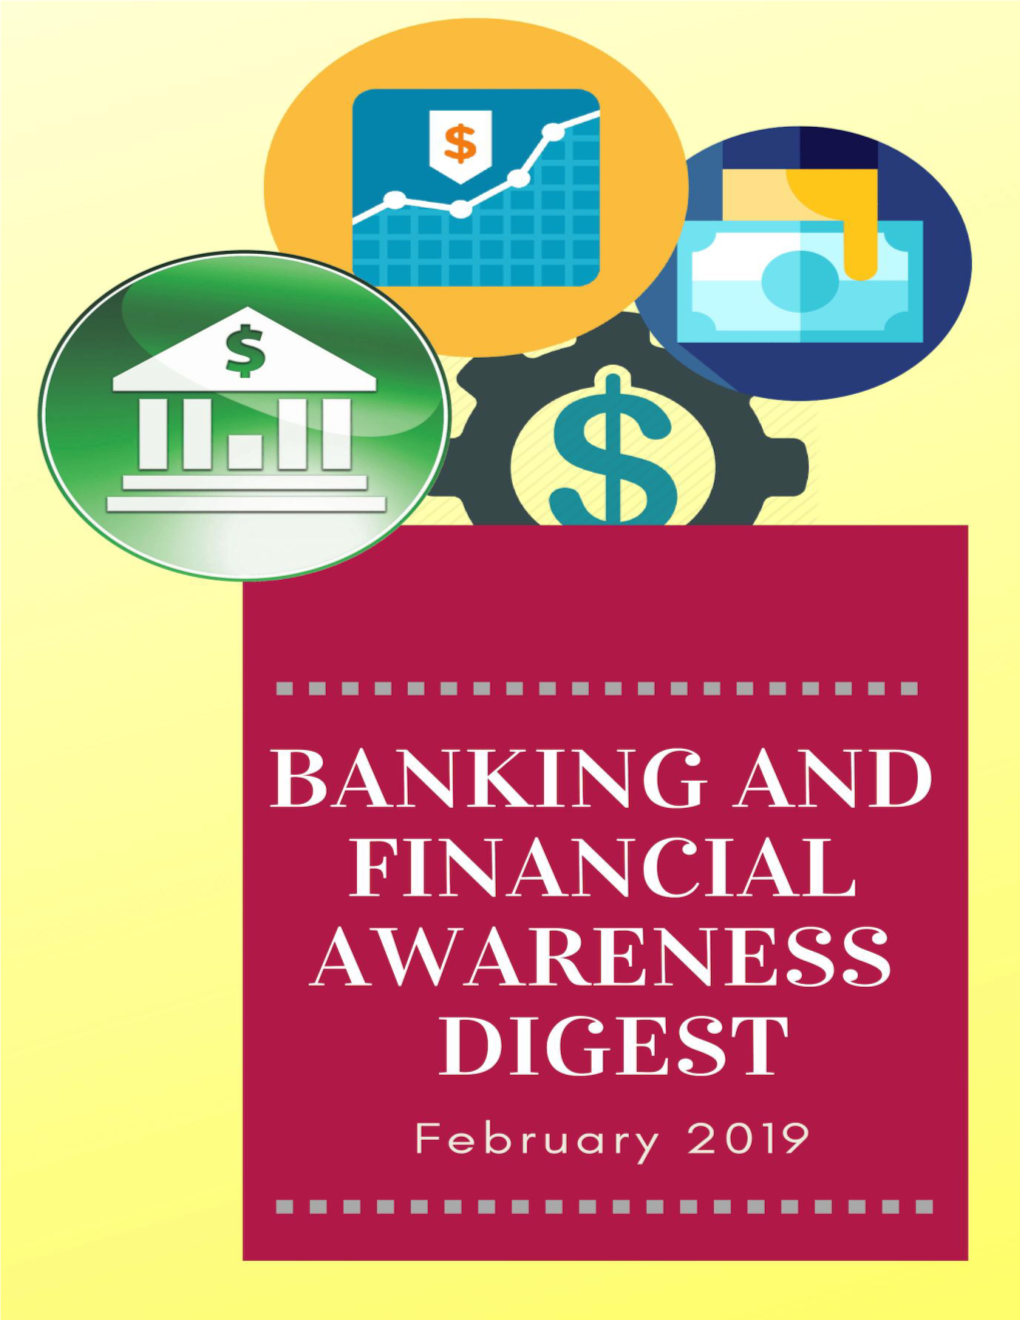 Banking and Financial Awareness Digest: February 2019